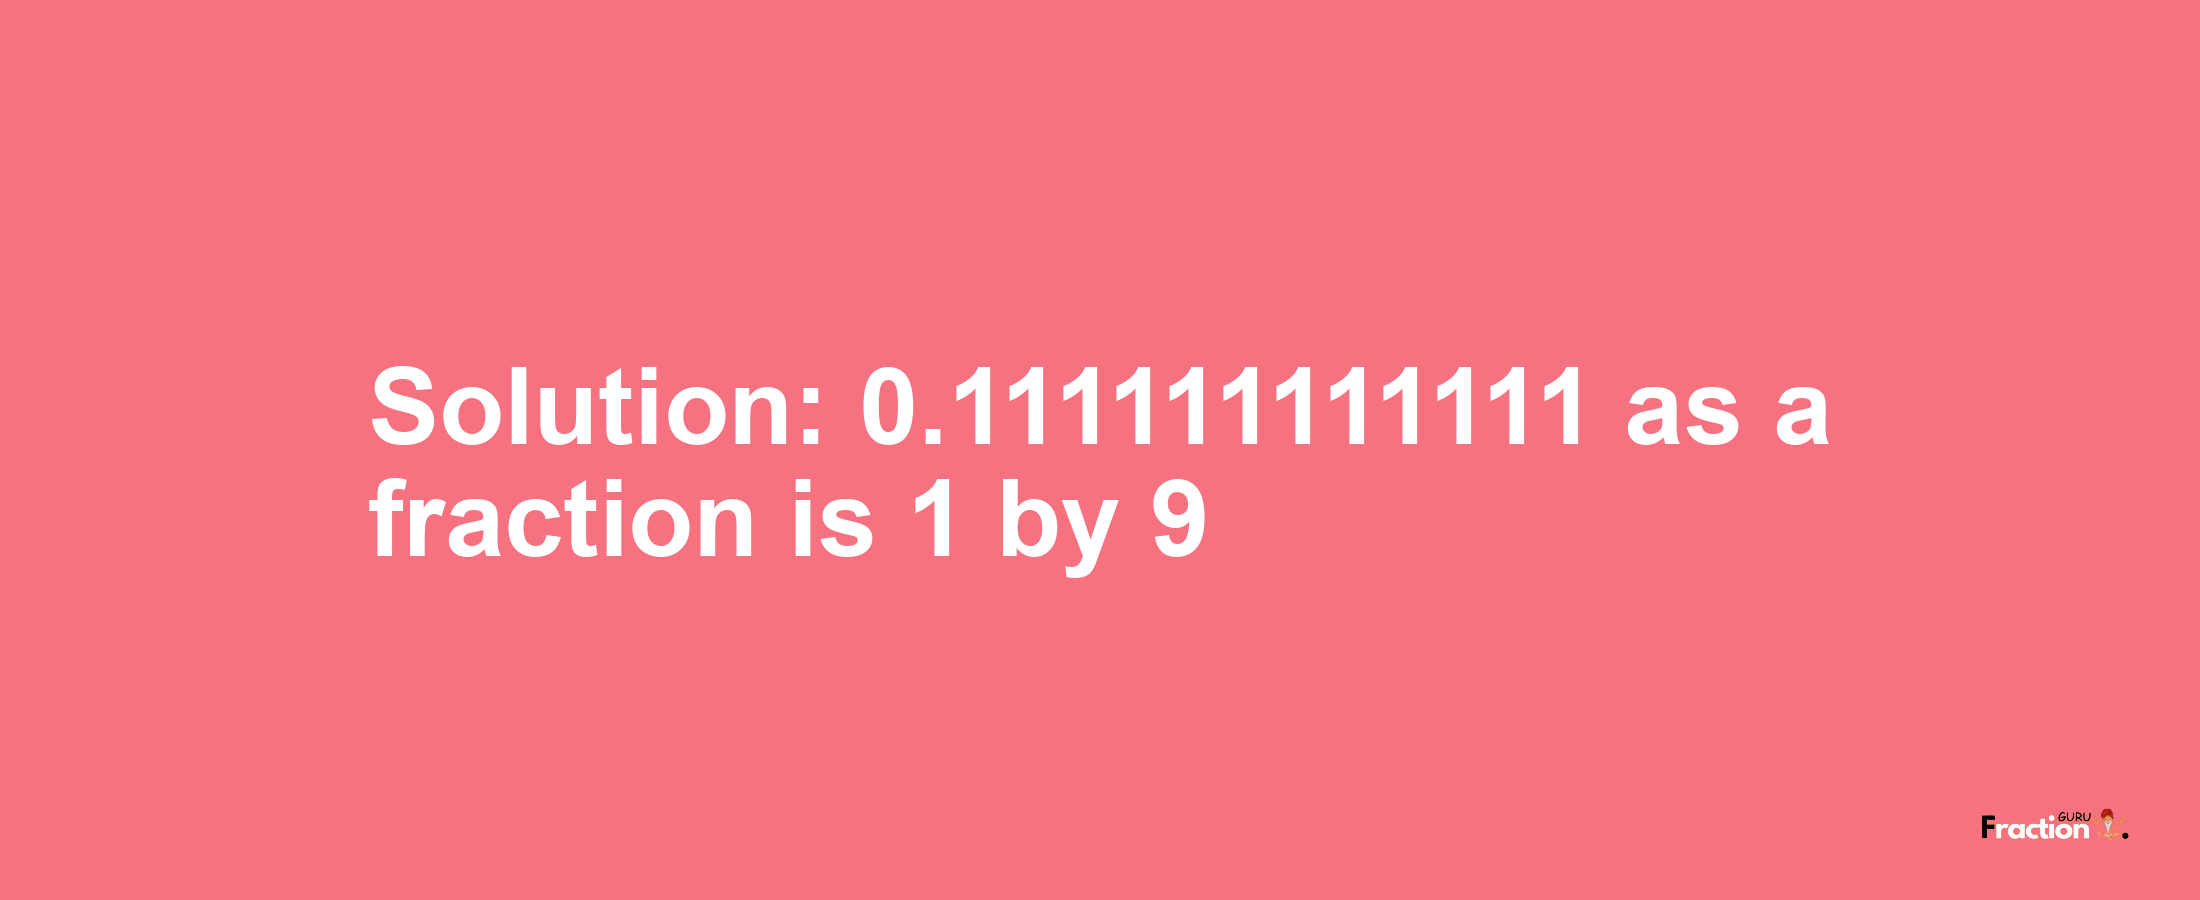 Solution:0.111111111111 as a fraction is 1/9